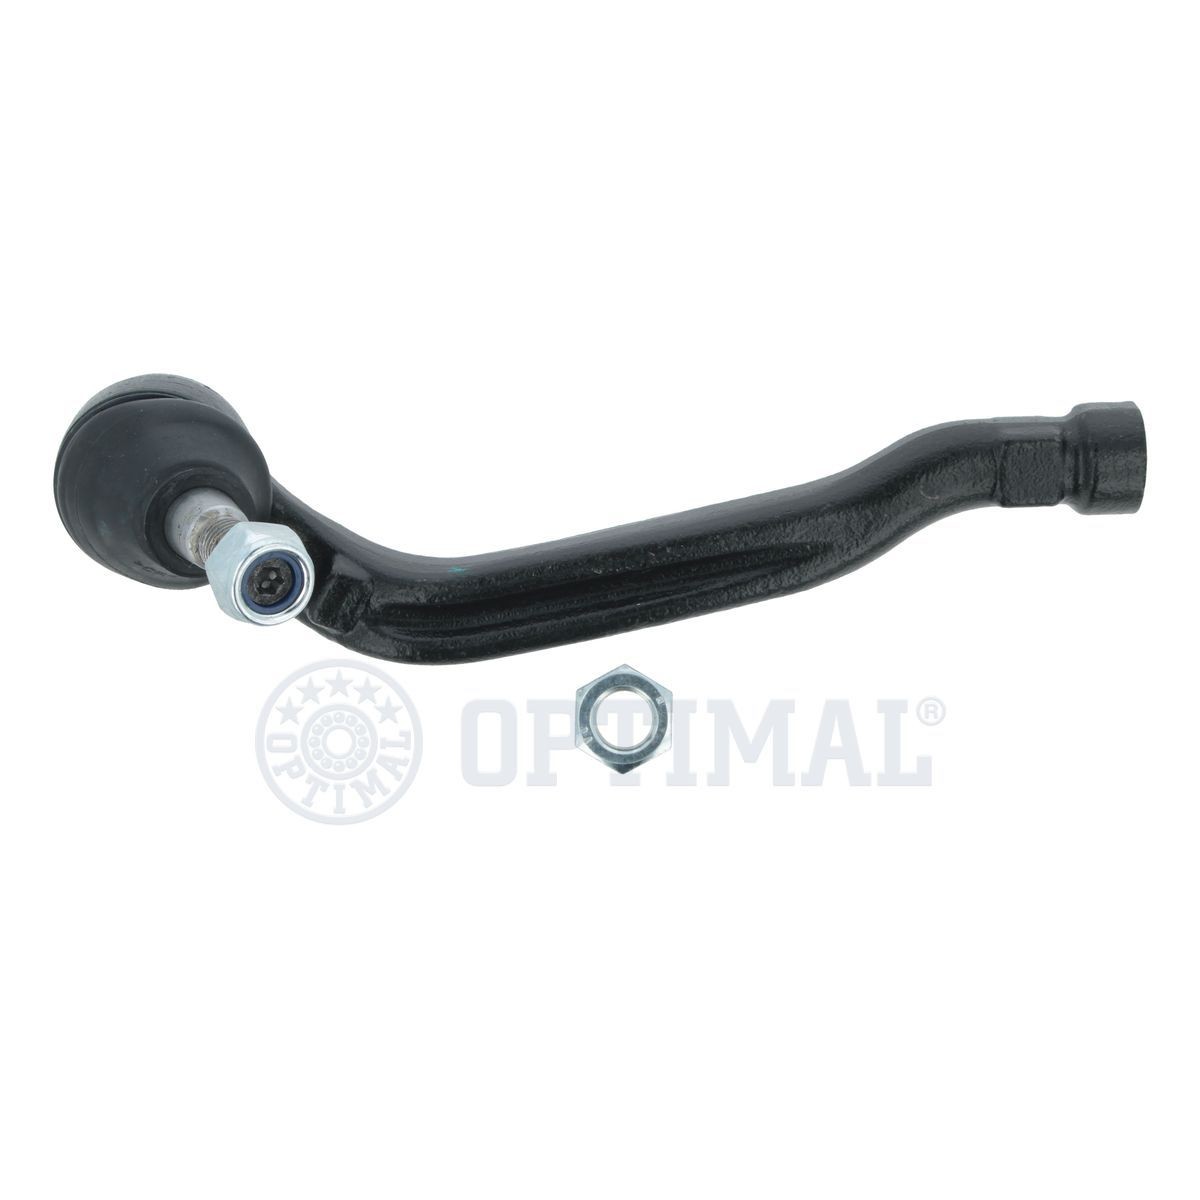 G1-2007 OPTIMAL Tie rod end CITROËN M12 x 1,5 RHT M mm, Front Axle Right, outer